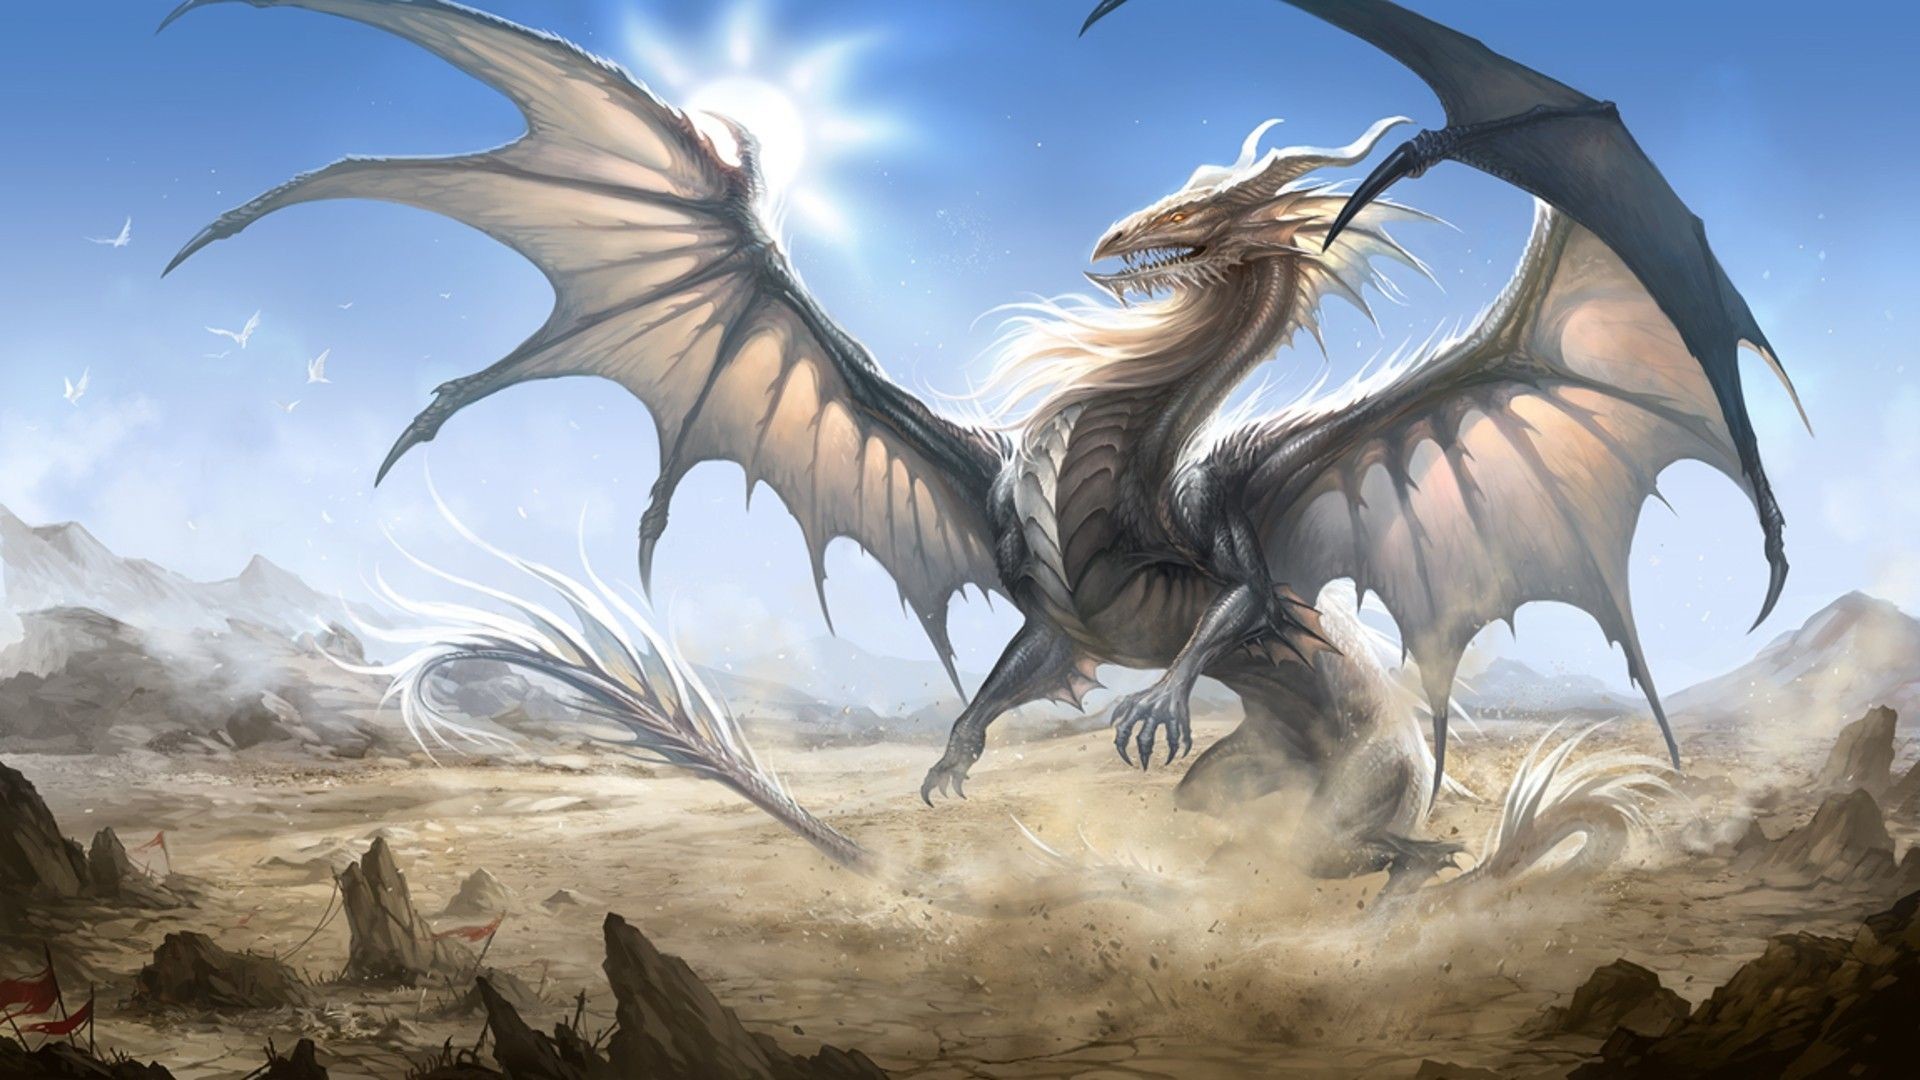 1920x1080 1920x1200 1385 Dragon HD Wallpapers | Background Images - Wallpaper Abyss">